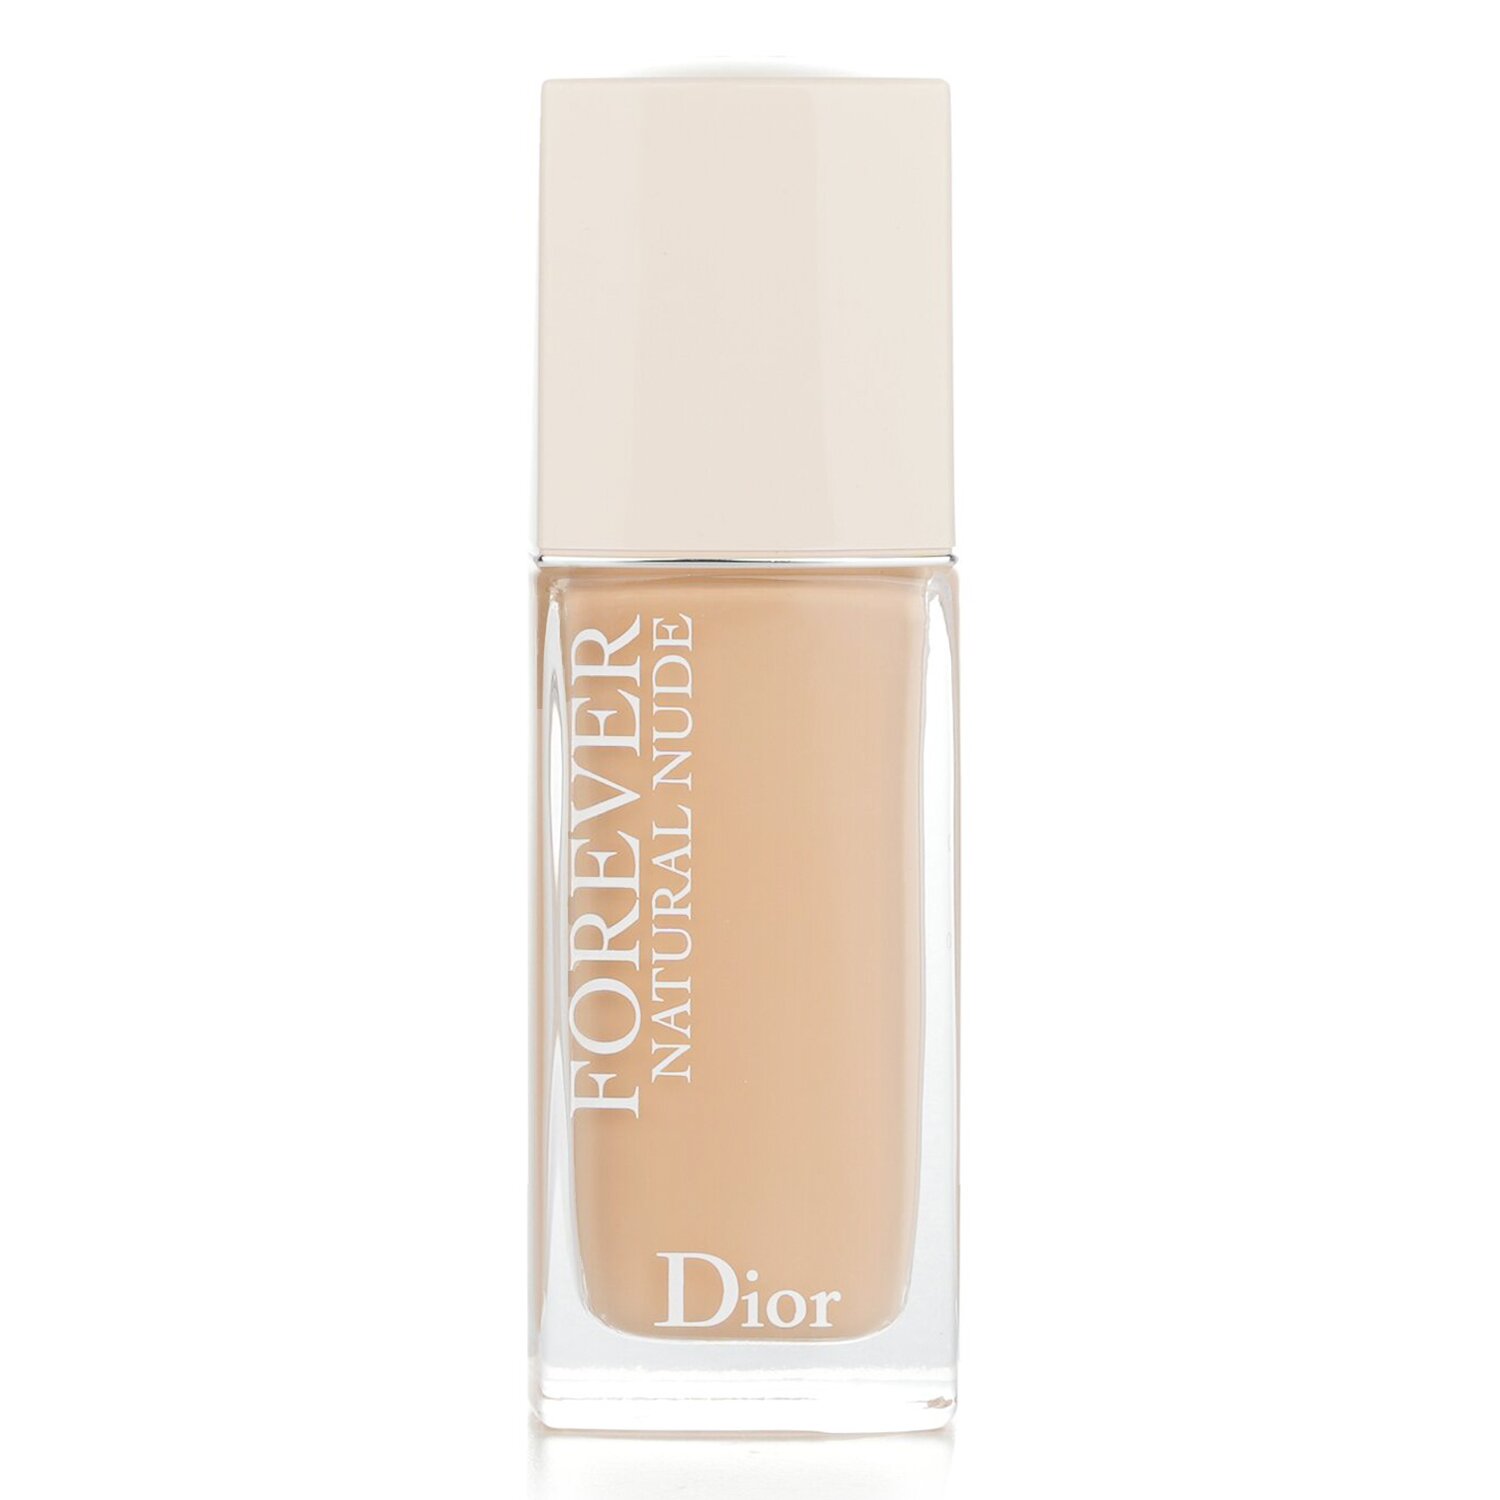 Christian Dior Dior Forever Natural Nude 24H Wear Foundation 30ml/1oz